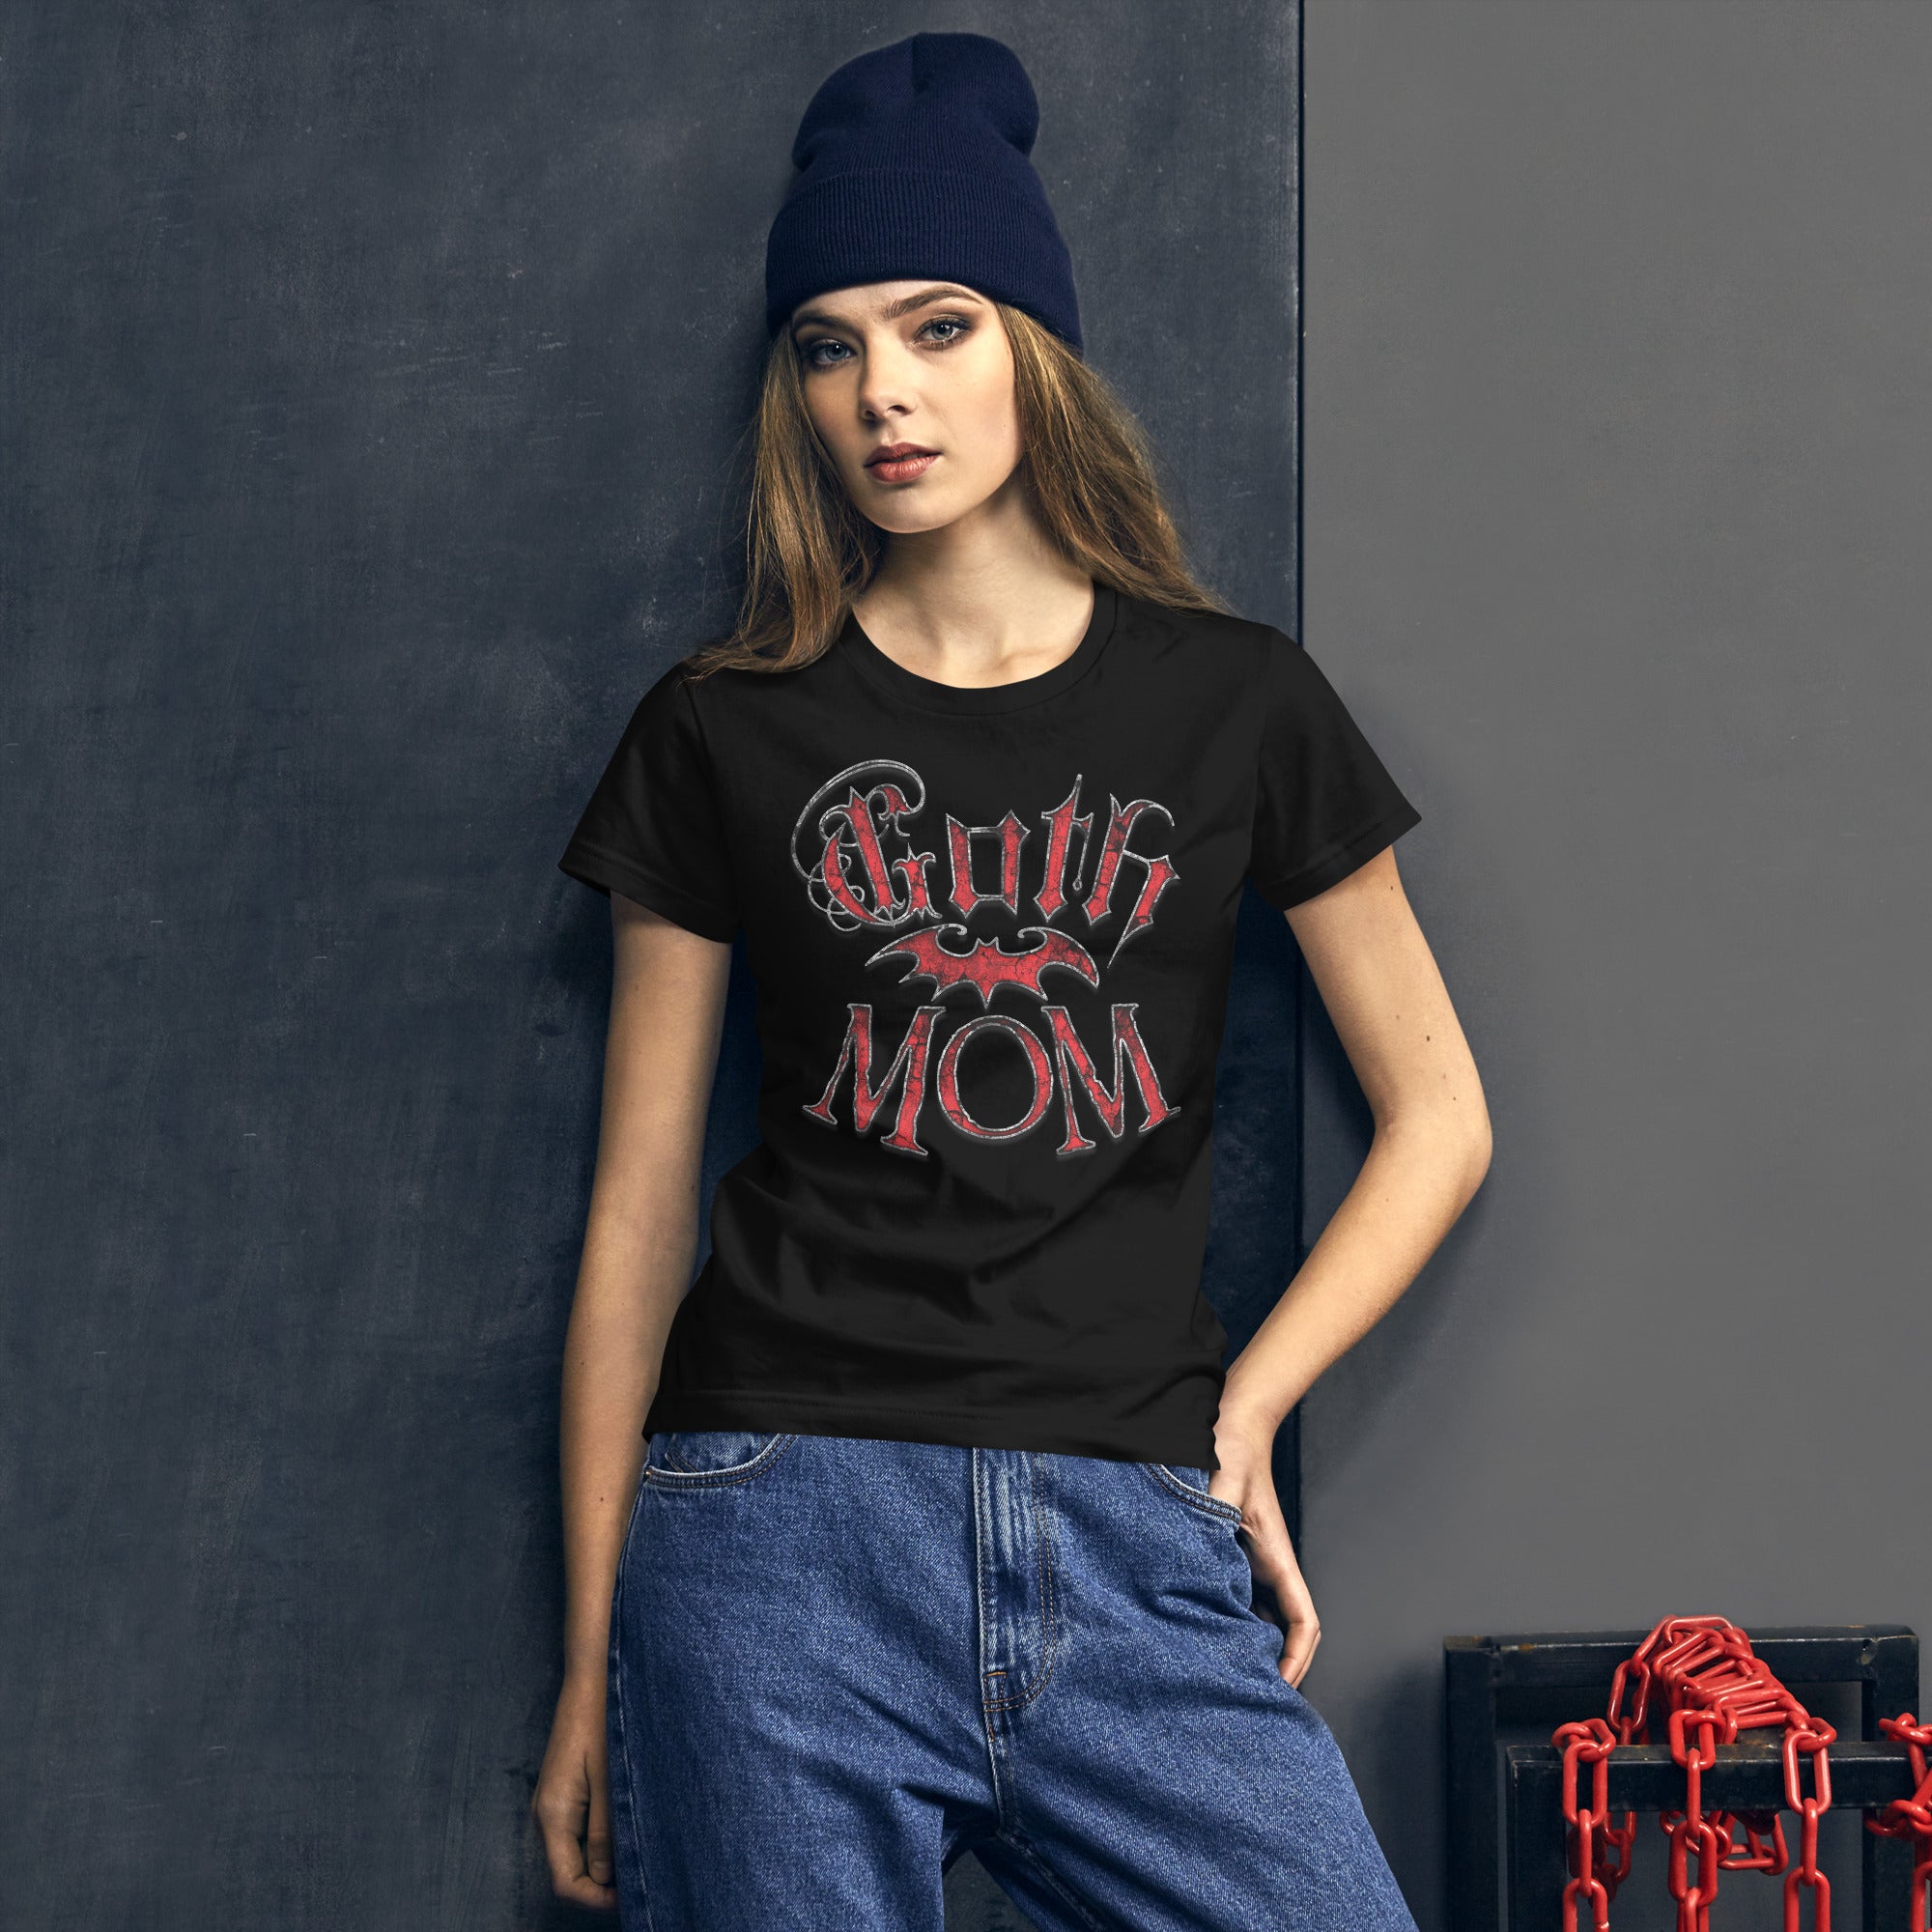 Red Goth Mom with Bat Mother's Day Women's Short Sleeve Babydoll T-shirt